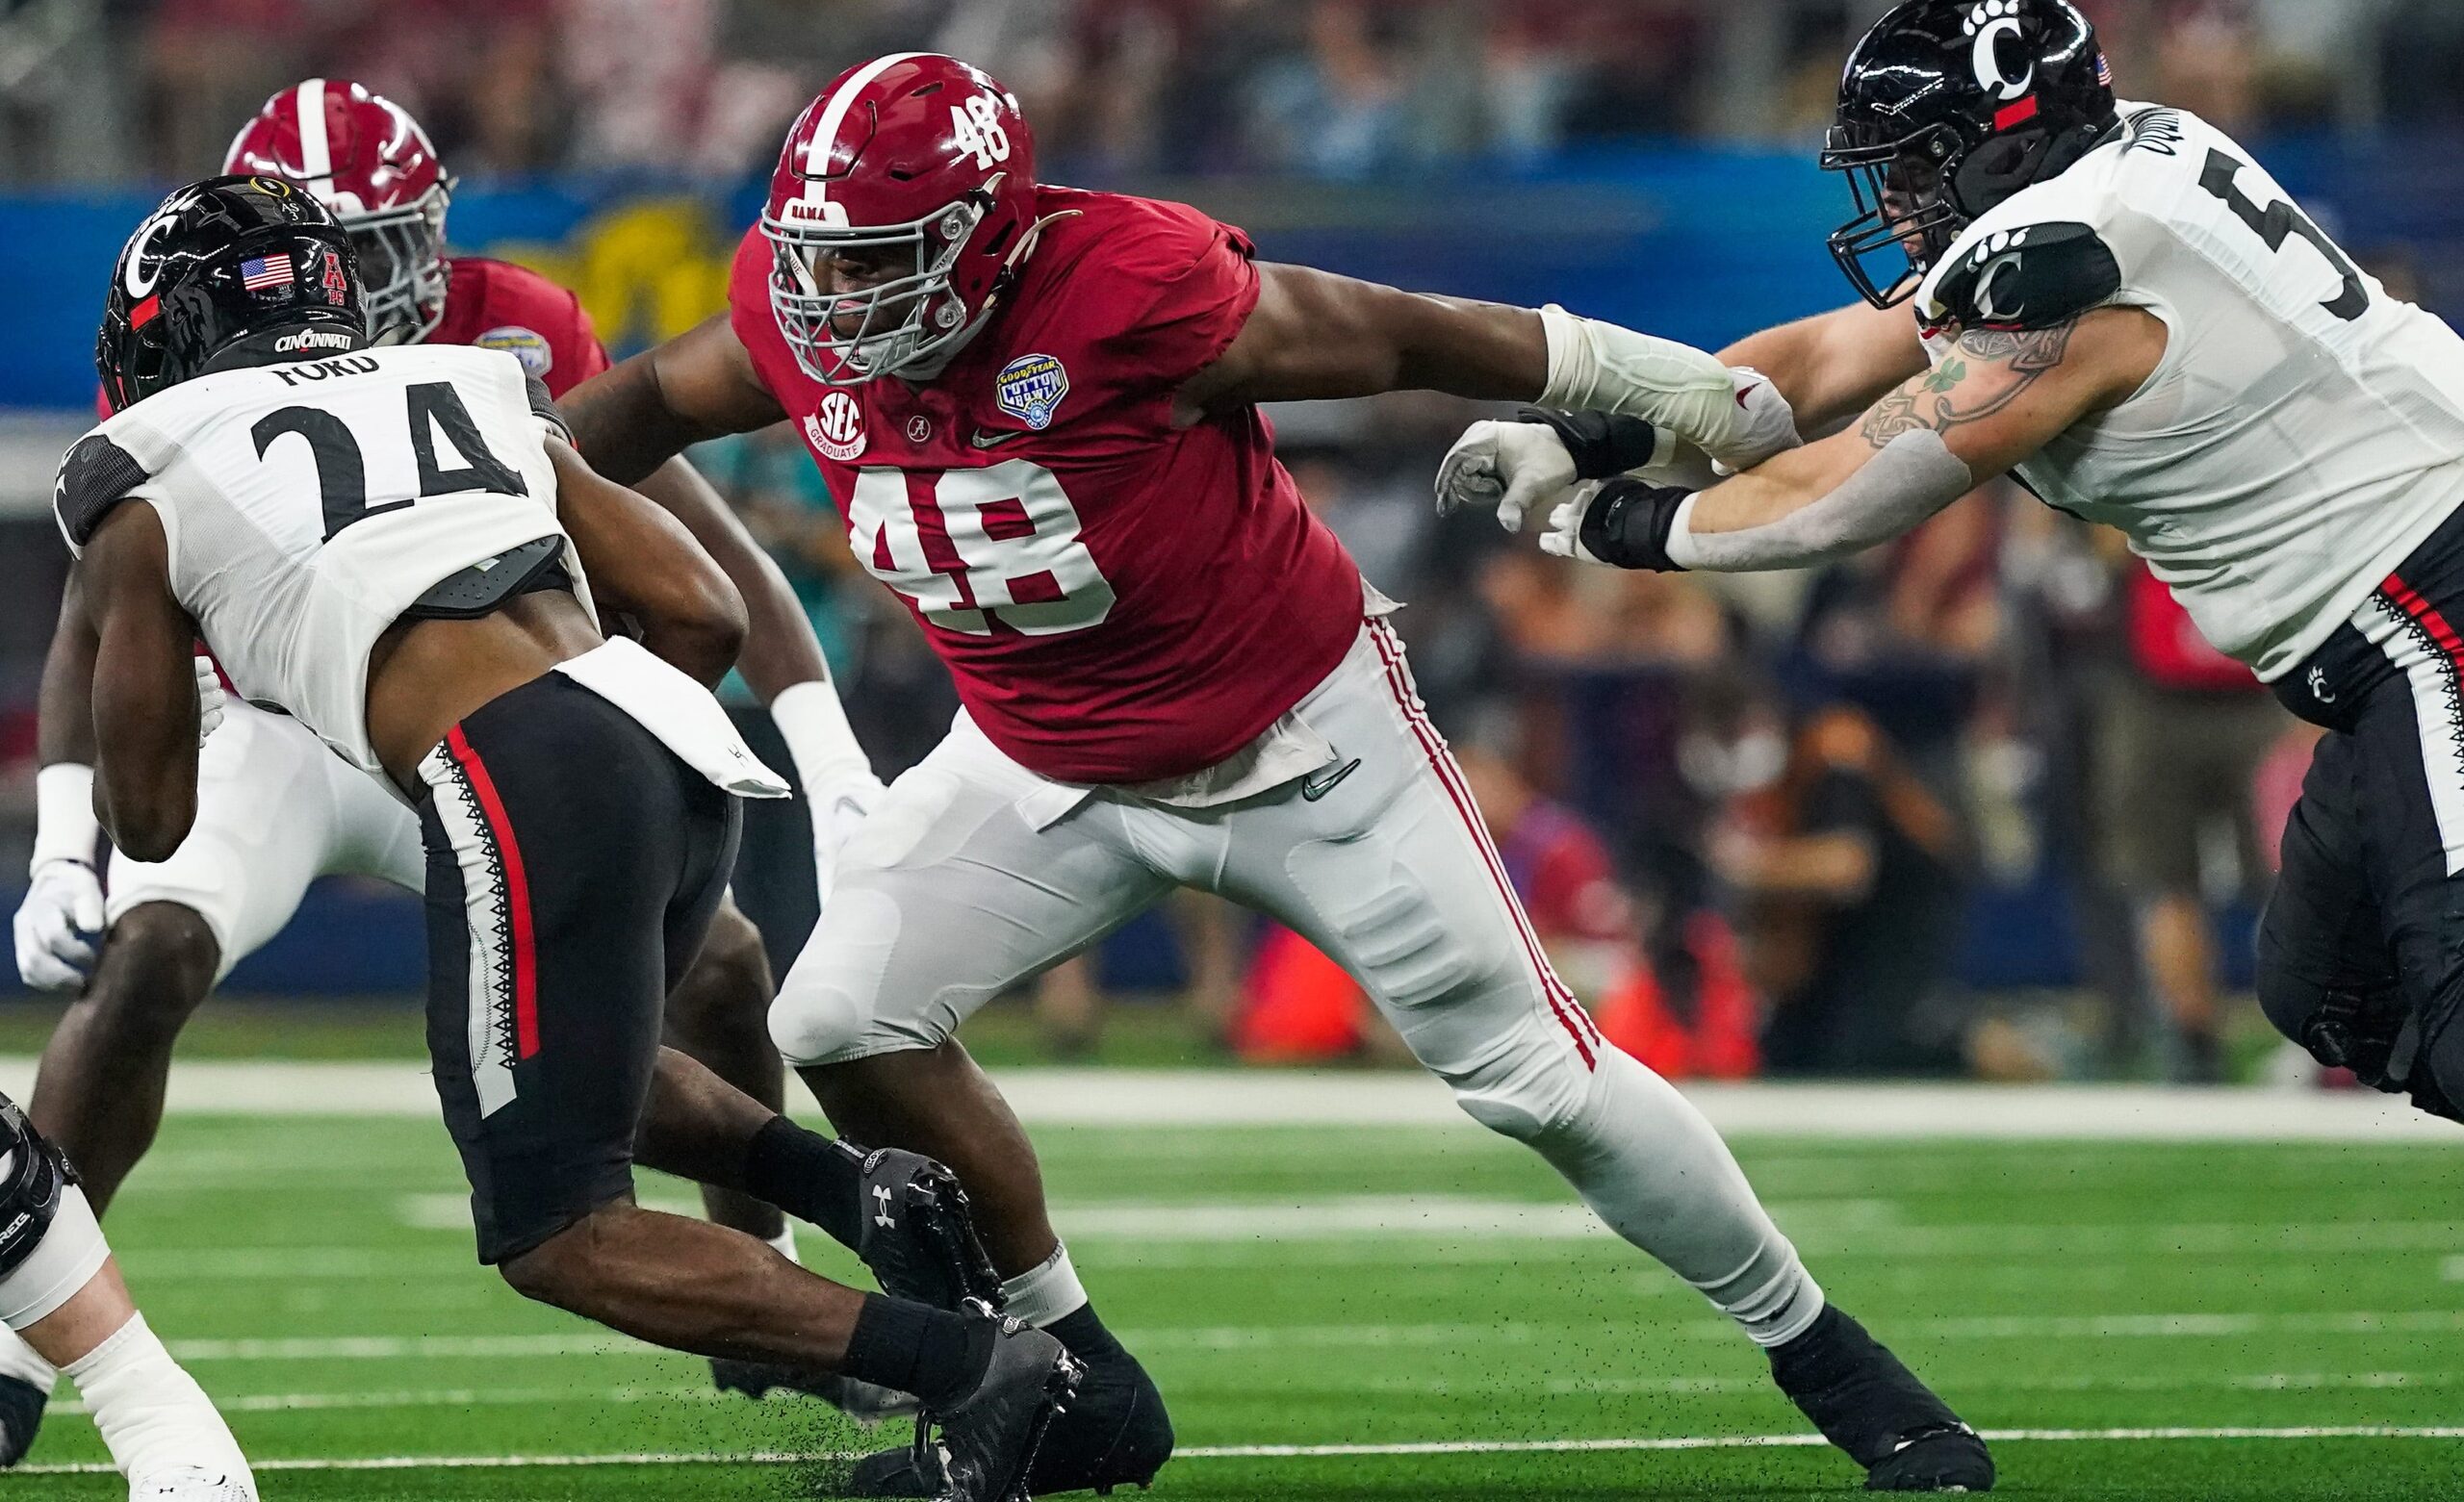 Alabama defensive lineman Phidarian Mathis (48) tackles Cincinnati running back Jerome Ford (24) in the 2021 College Football Playoff Semifinal game at the 86th Cotton Bowl in AT&T Stadium in Arlington, Texas Friday, Dec. 31, 2021. [Staff Photo/Gary Cosby Jr.]  College Football Playoffs Alabama Vs Cincinnati